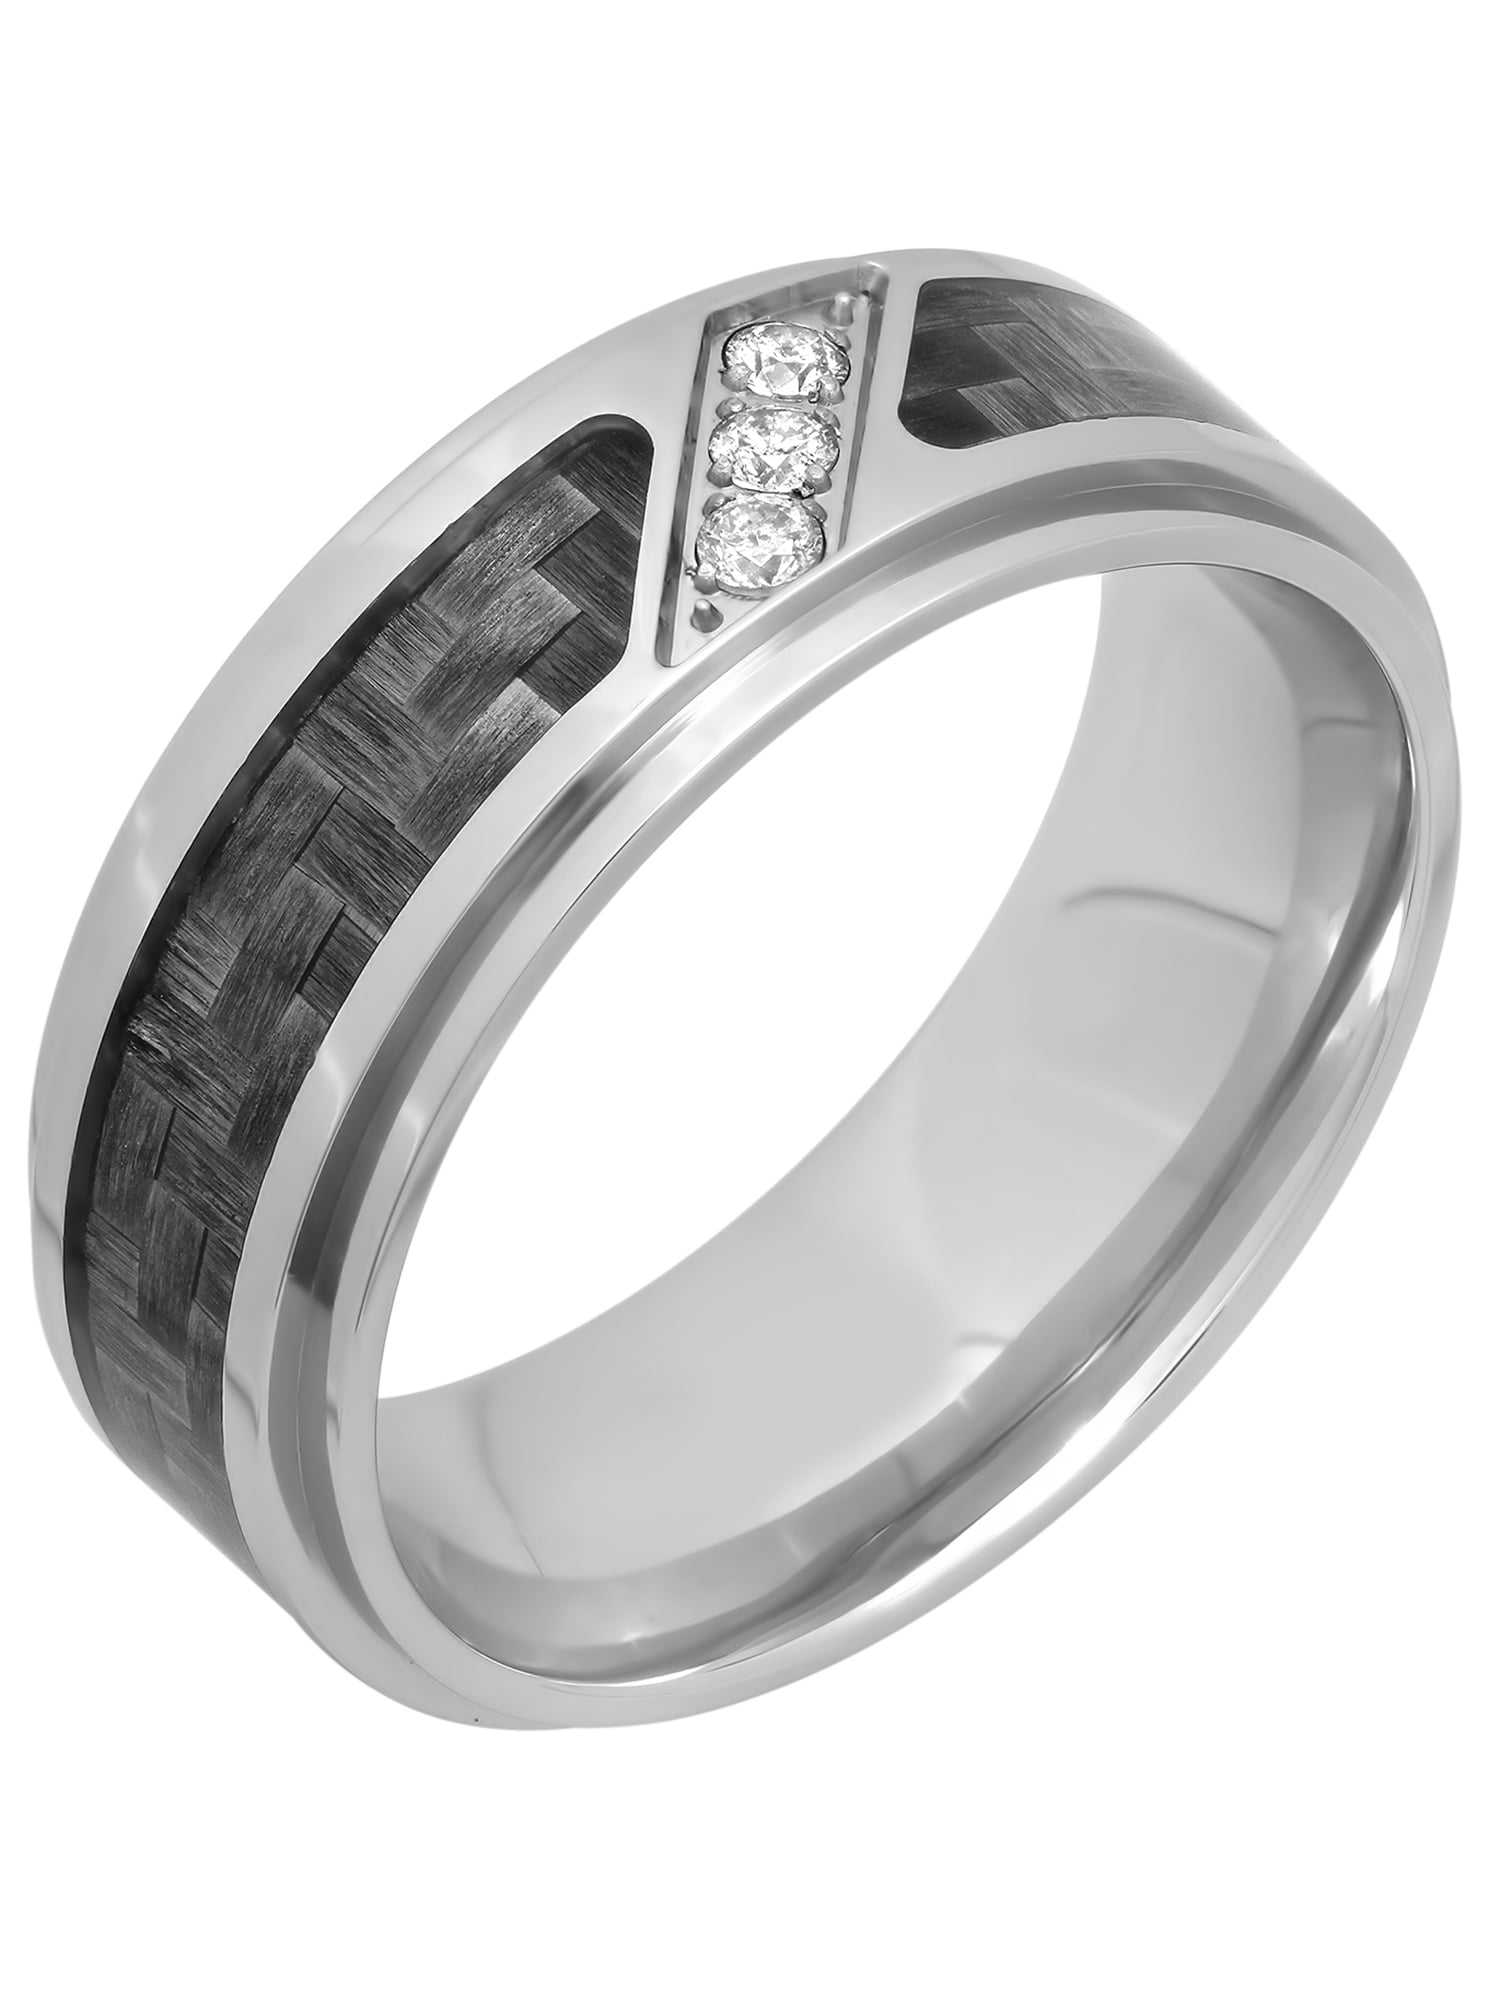 Men's Diamond Accent Stainless Steel with Gray Carbon Fiber Ring, 8mm ...